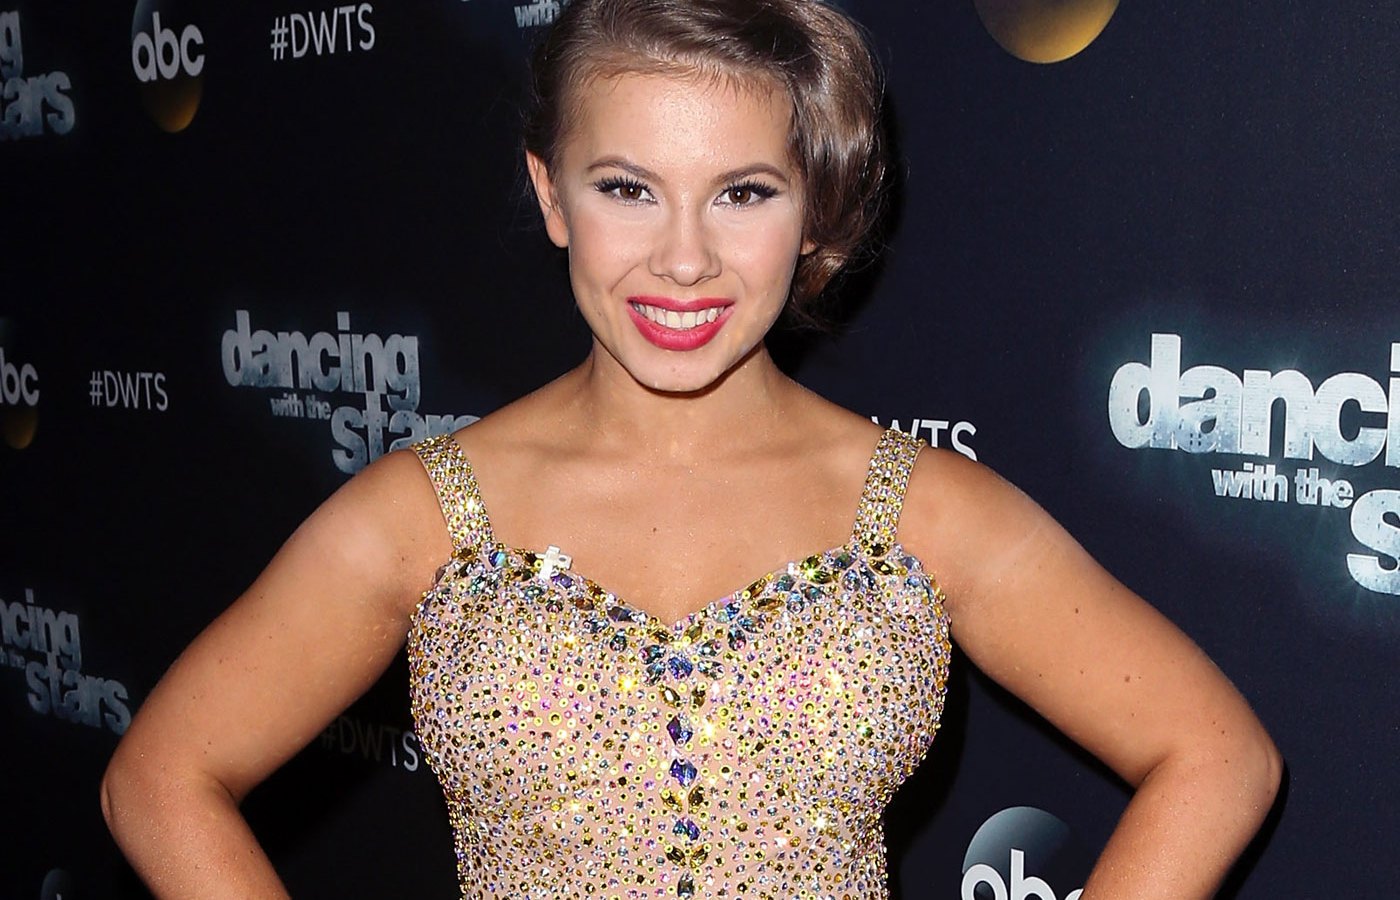 Bindi Irwin's toenails are falling off, and she's supergluing them bac